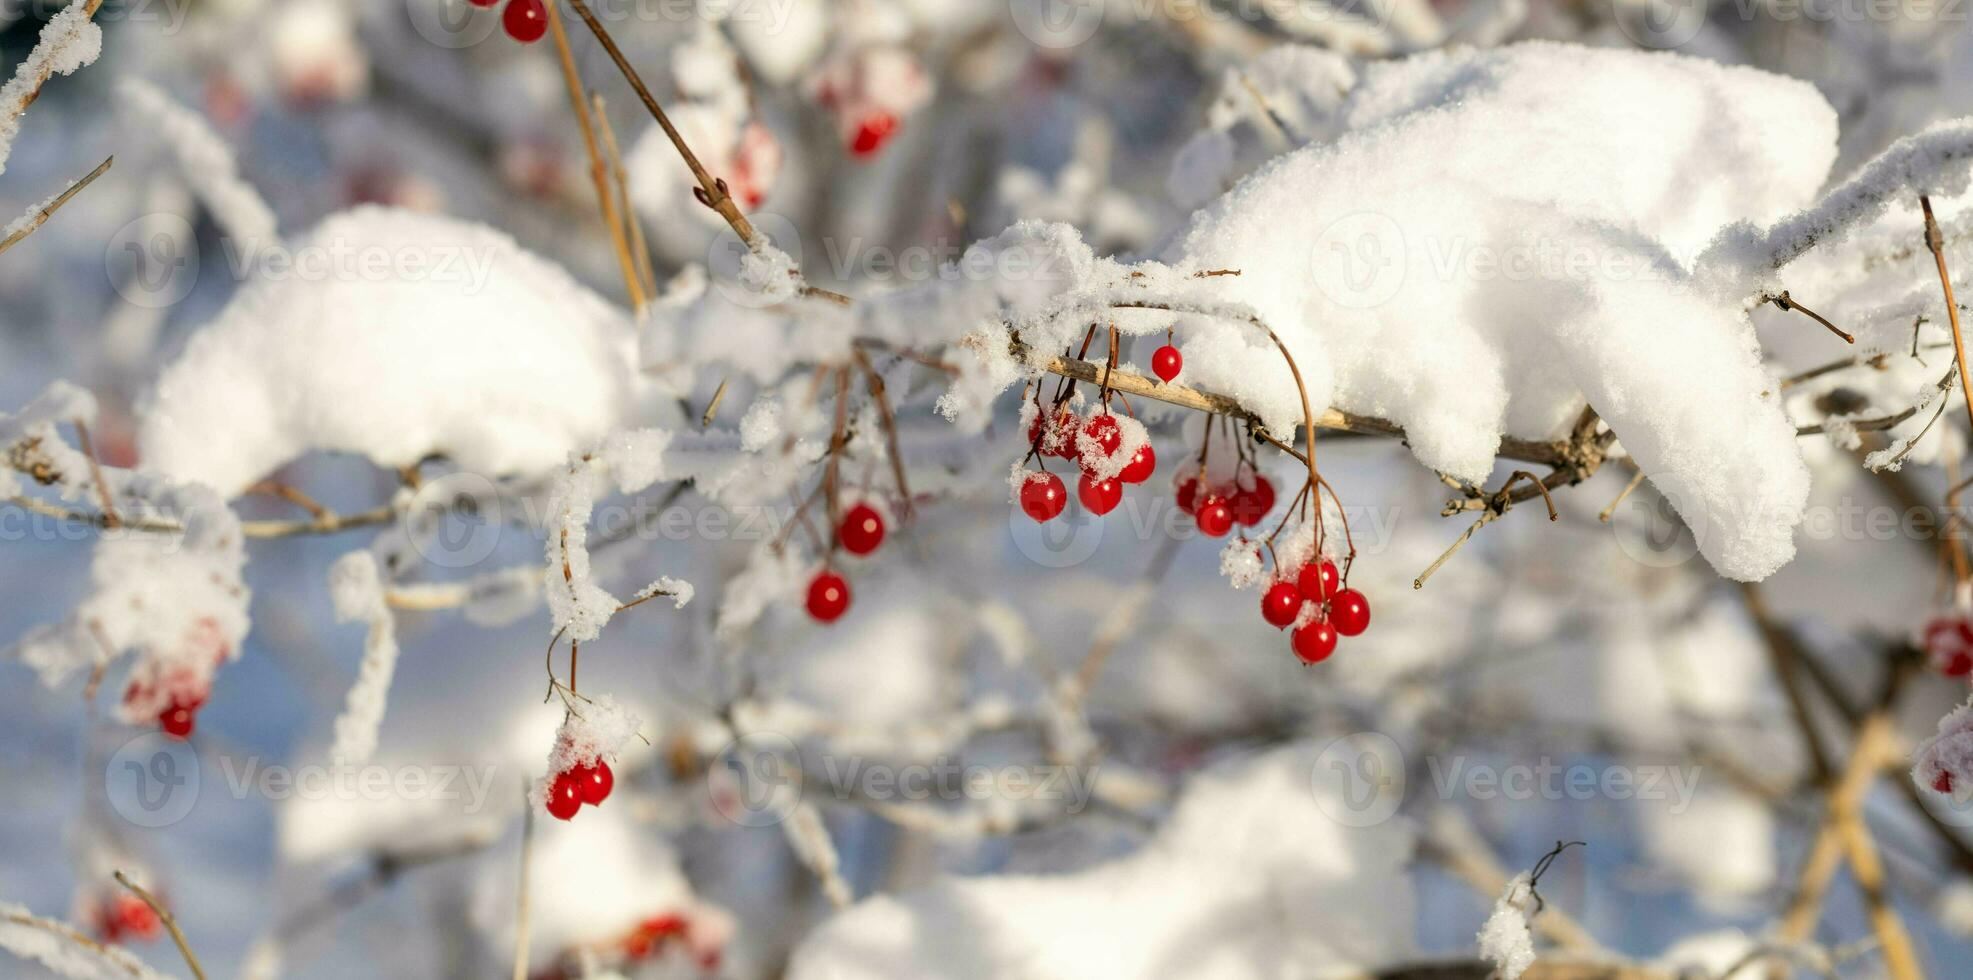 Snowy branches and red berries in forest or park. Winter image. Horizontal format. Selective focus. photo